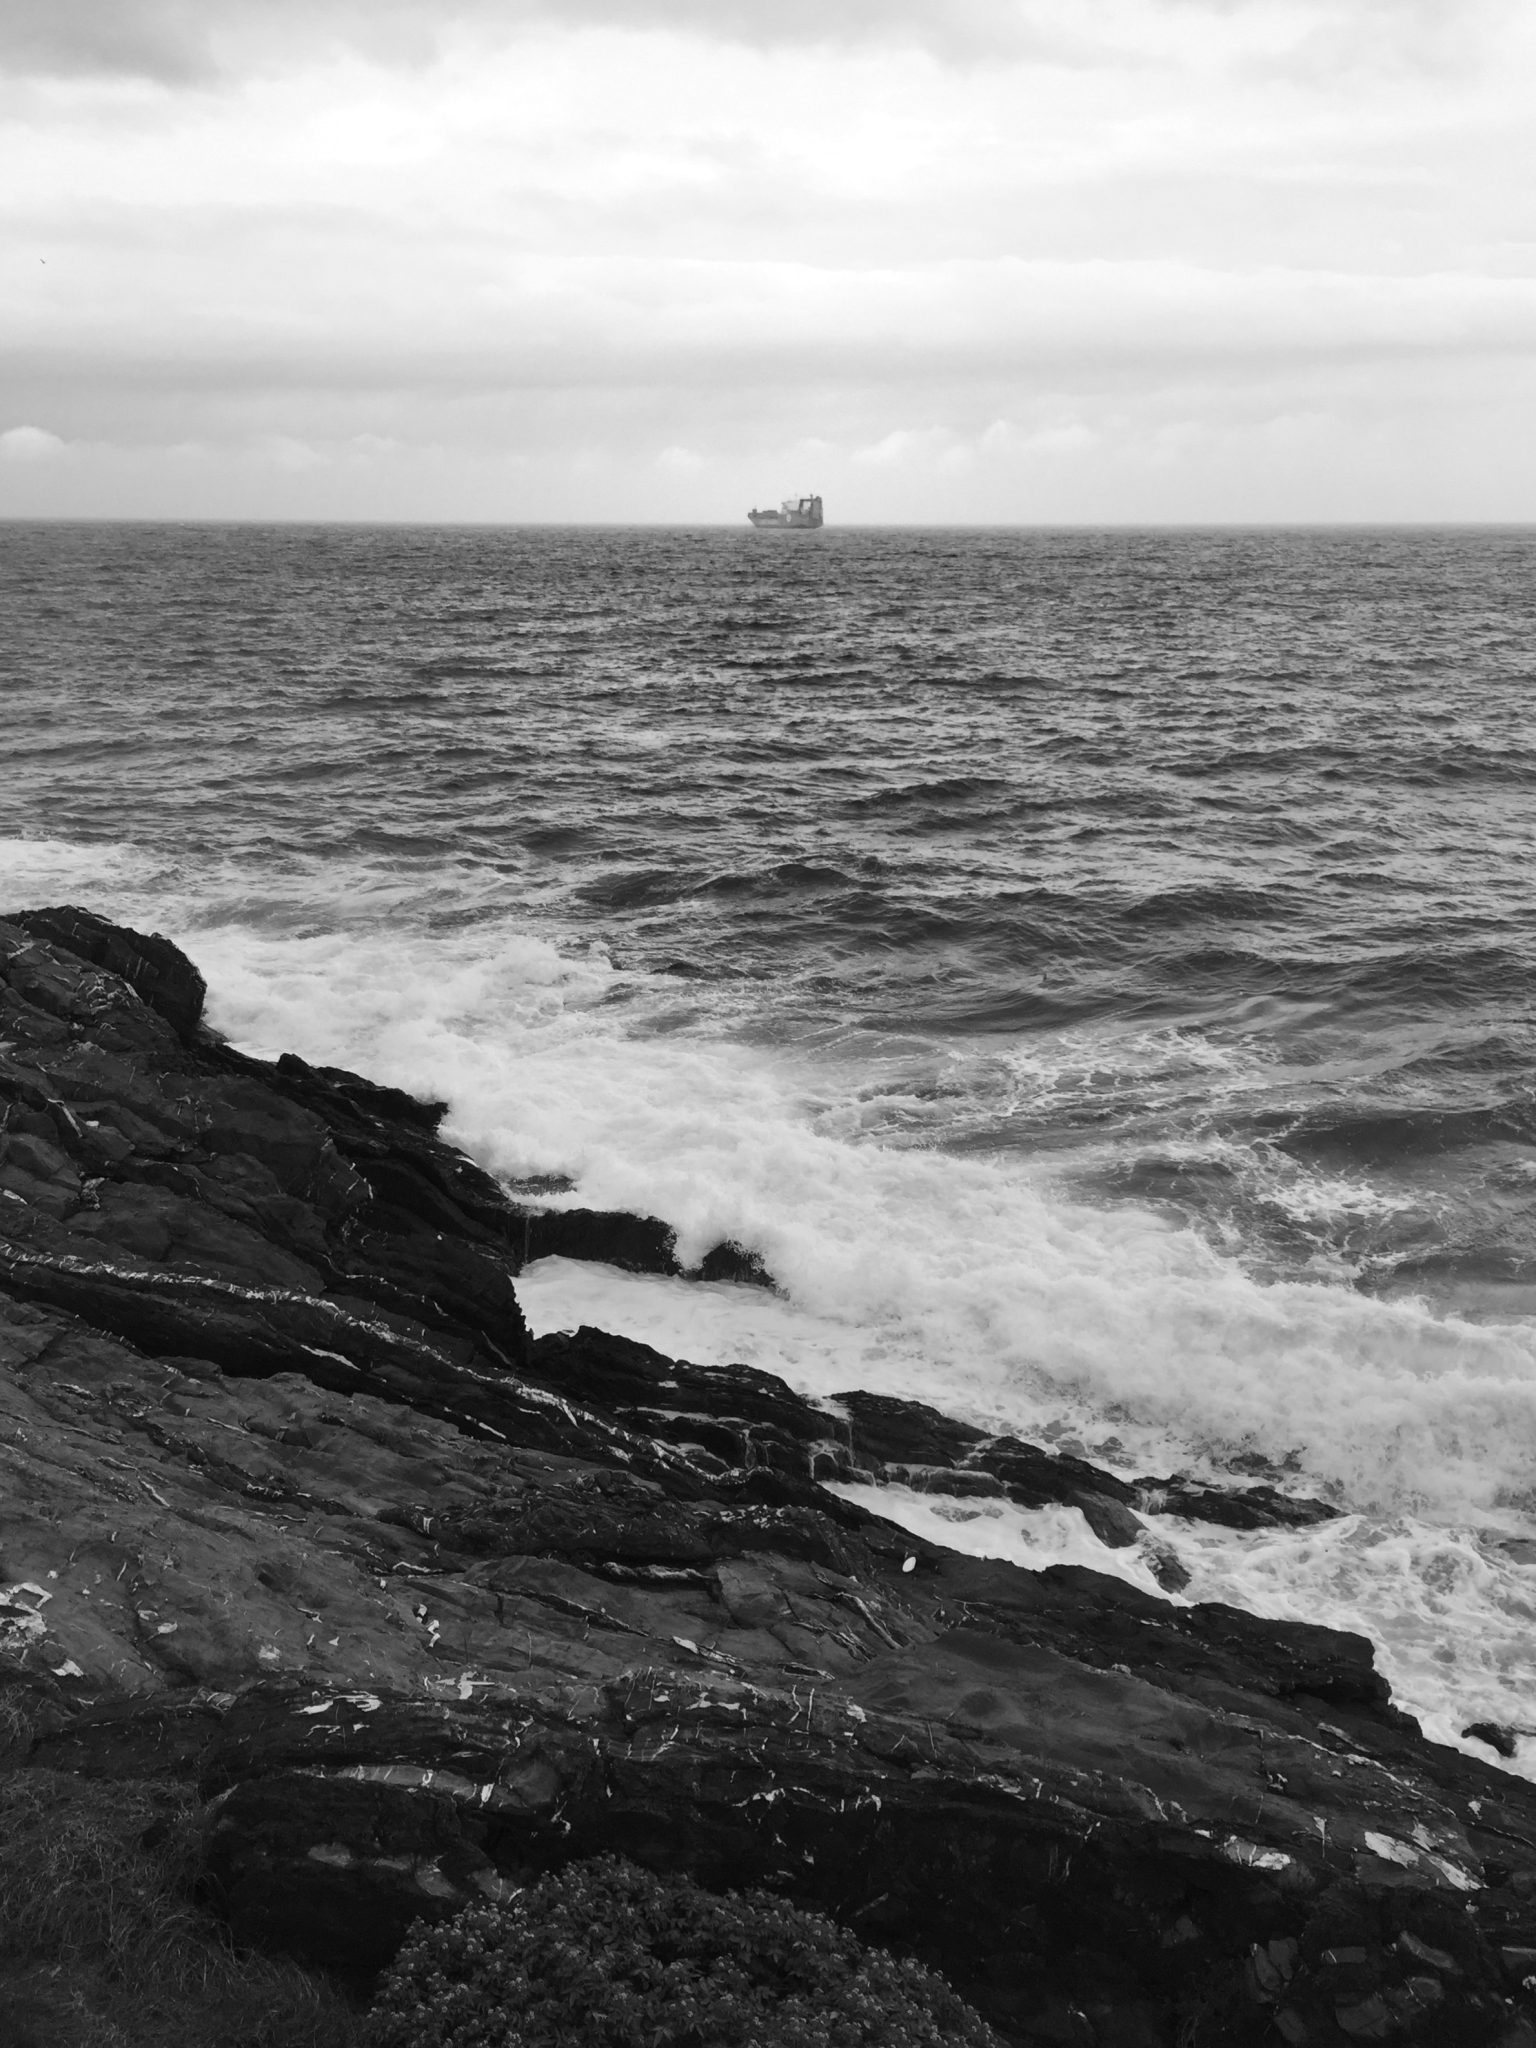 Black and White picture of a ship at sea with rocks in the foreground. Picture taken from the seaside fo Genova Nervi, Genoa.